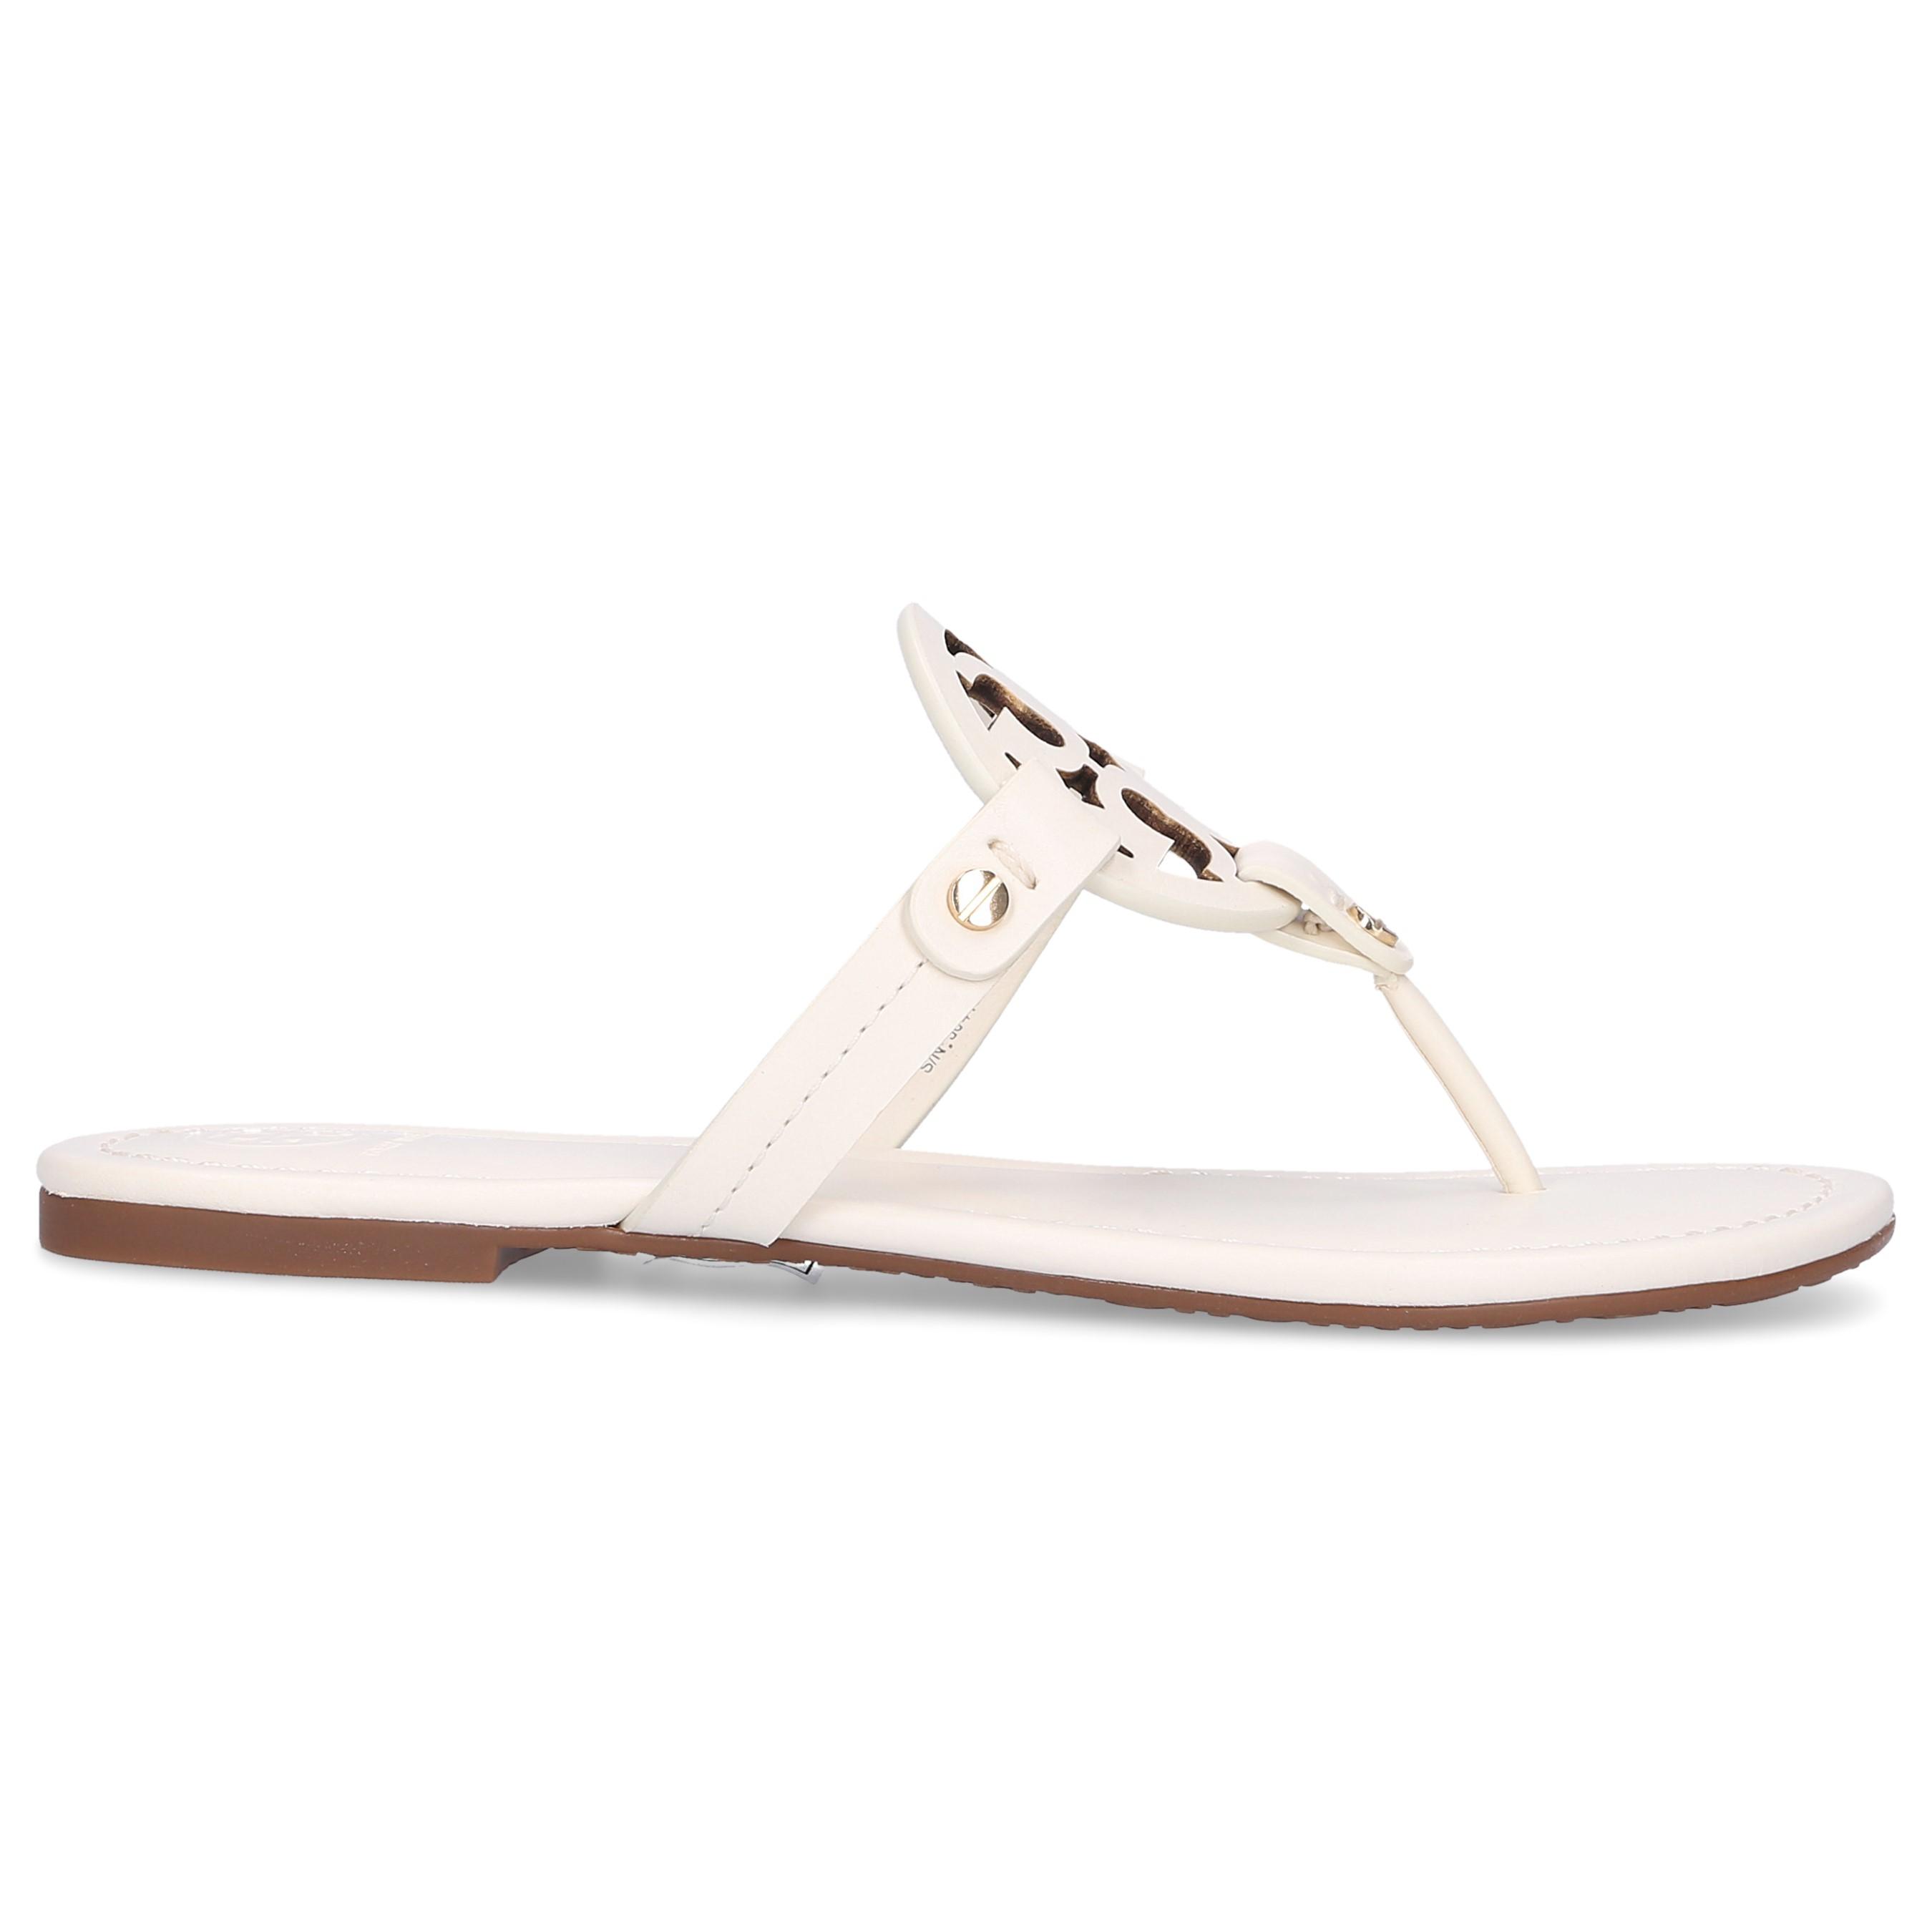 Tory Burch Leather Flip Flops Miller in White - Lyst